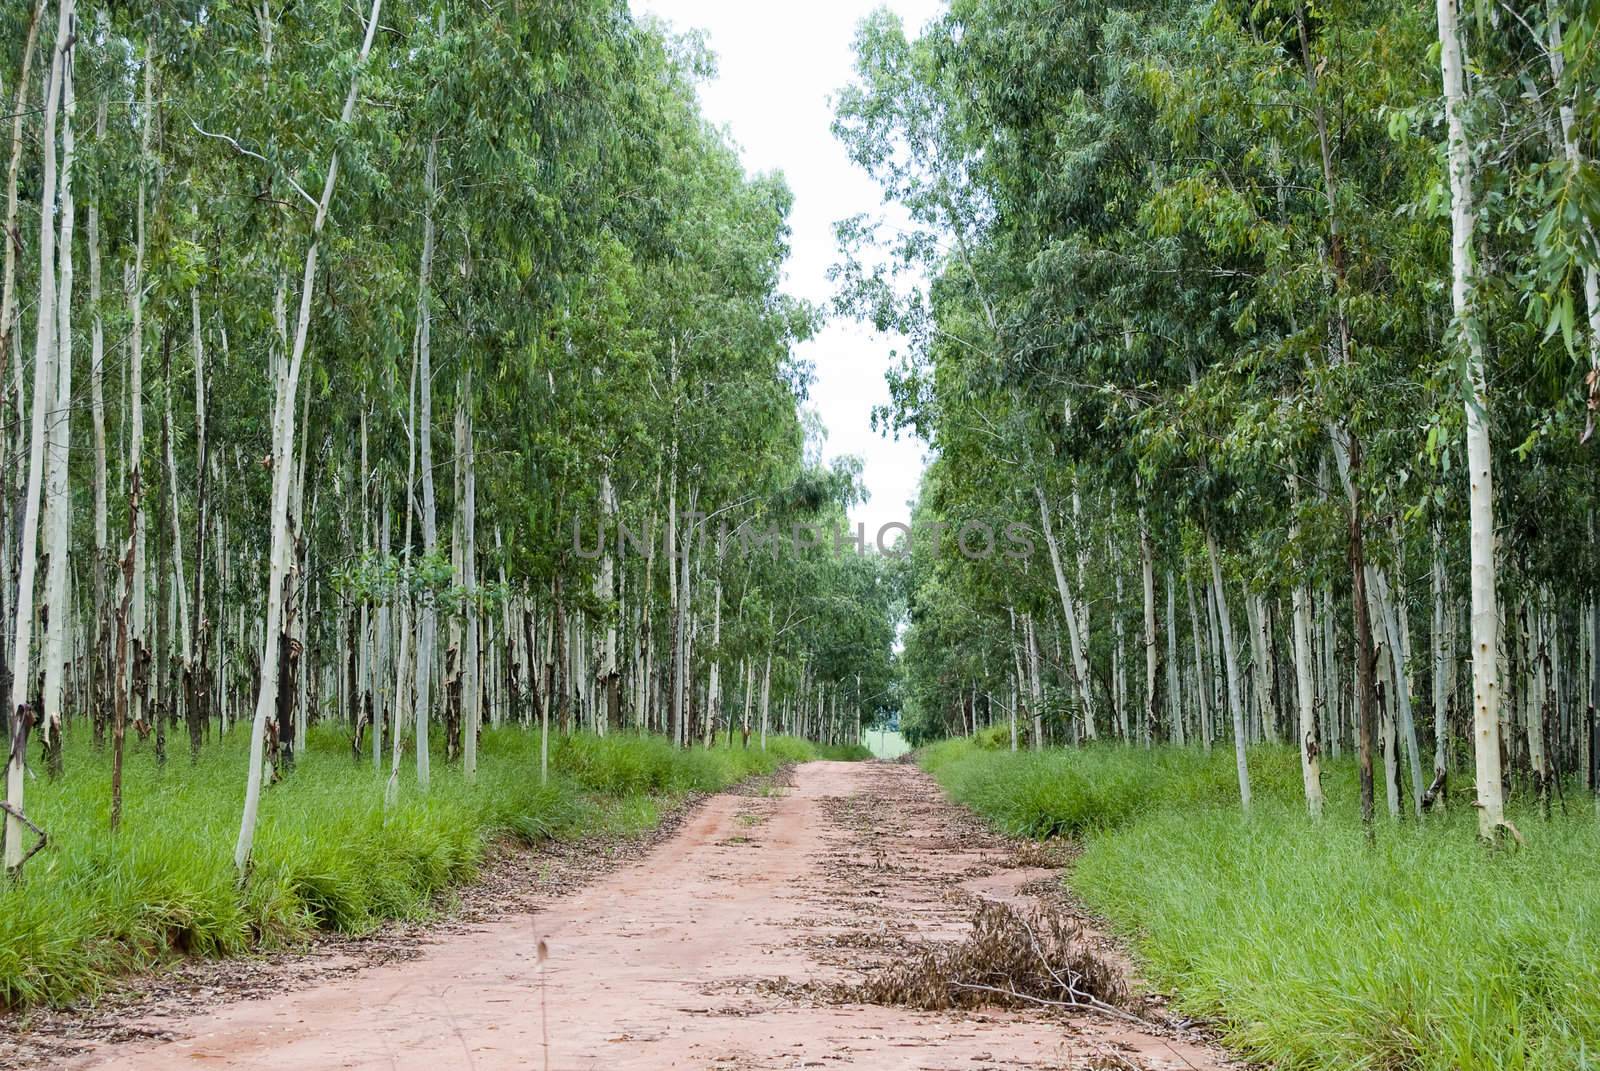 Road through the forest of eucalyptus on southern Brazil.